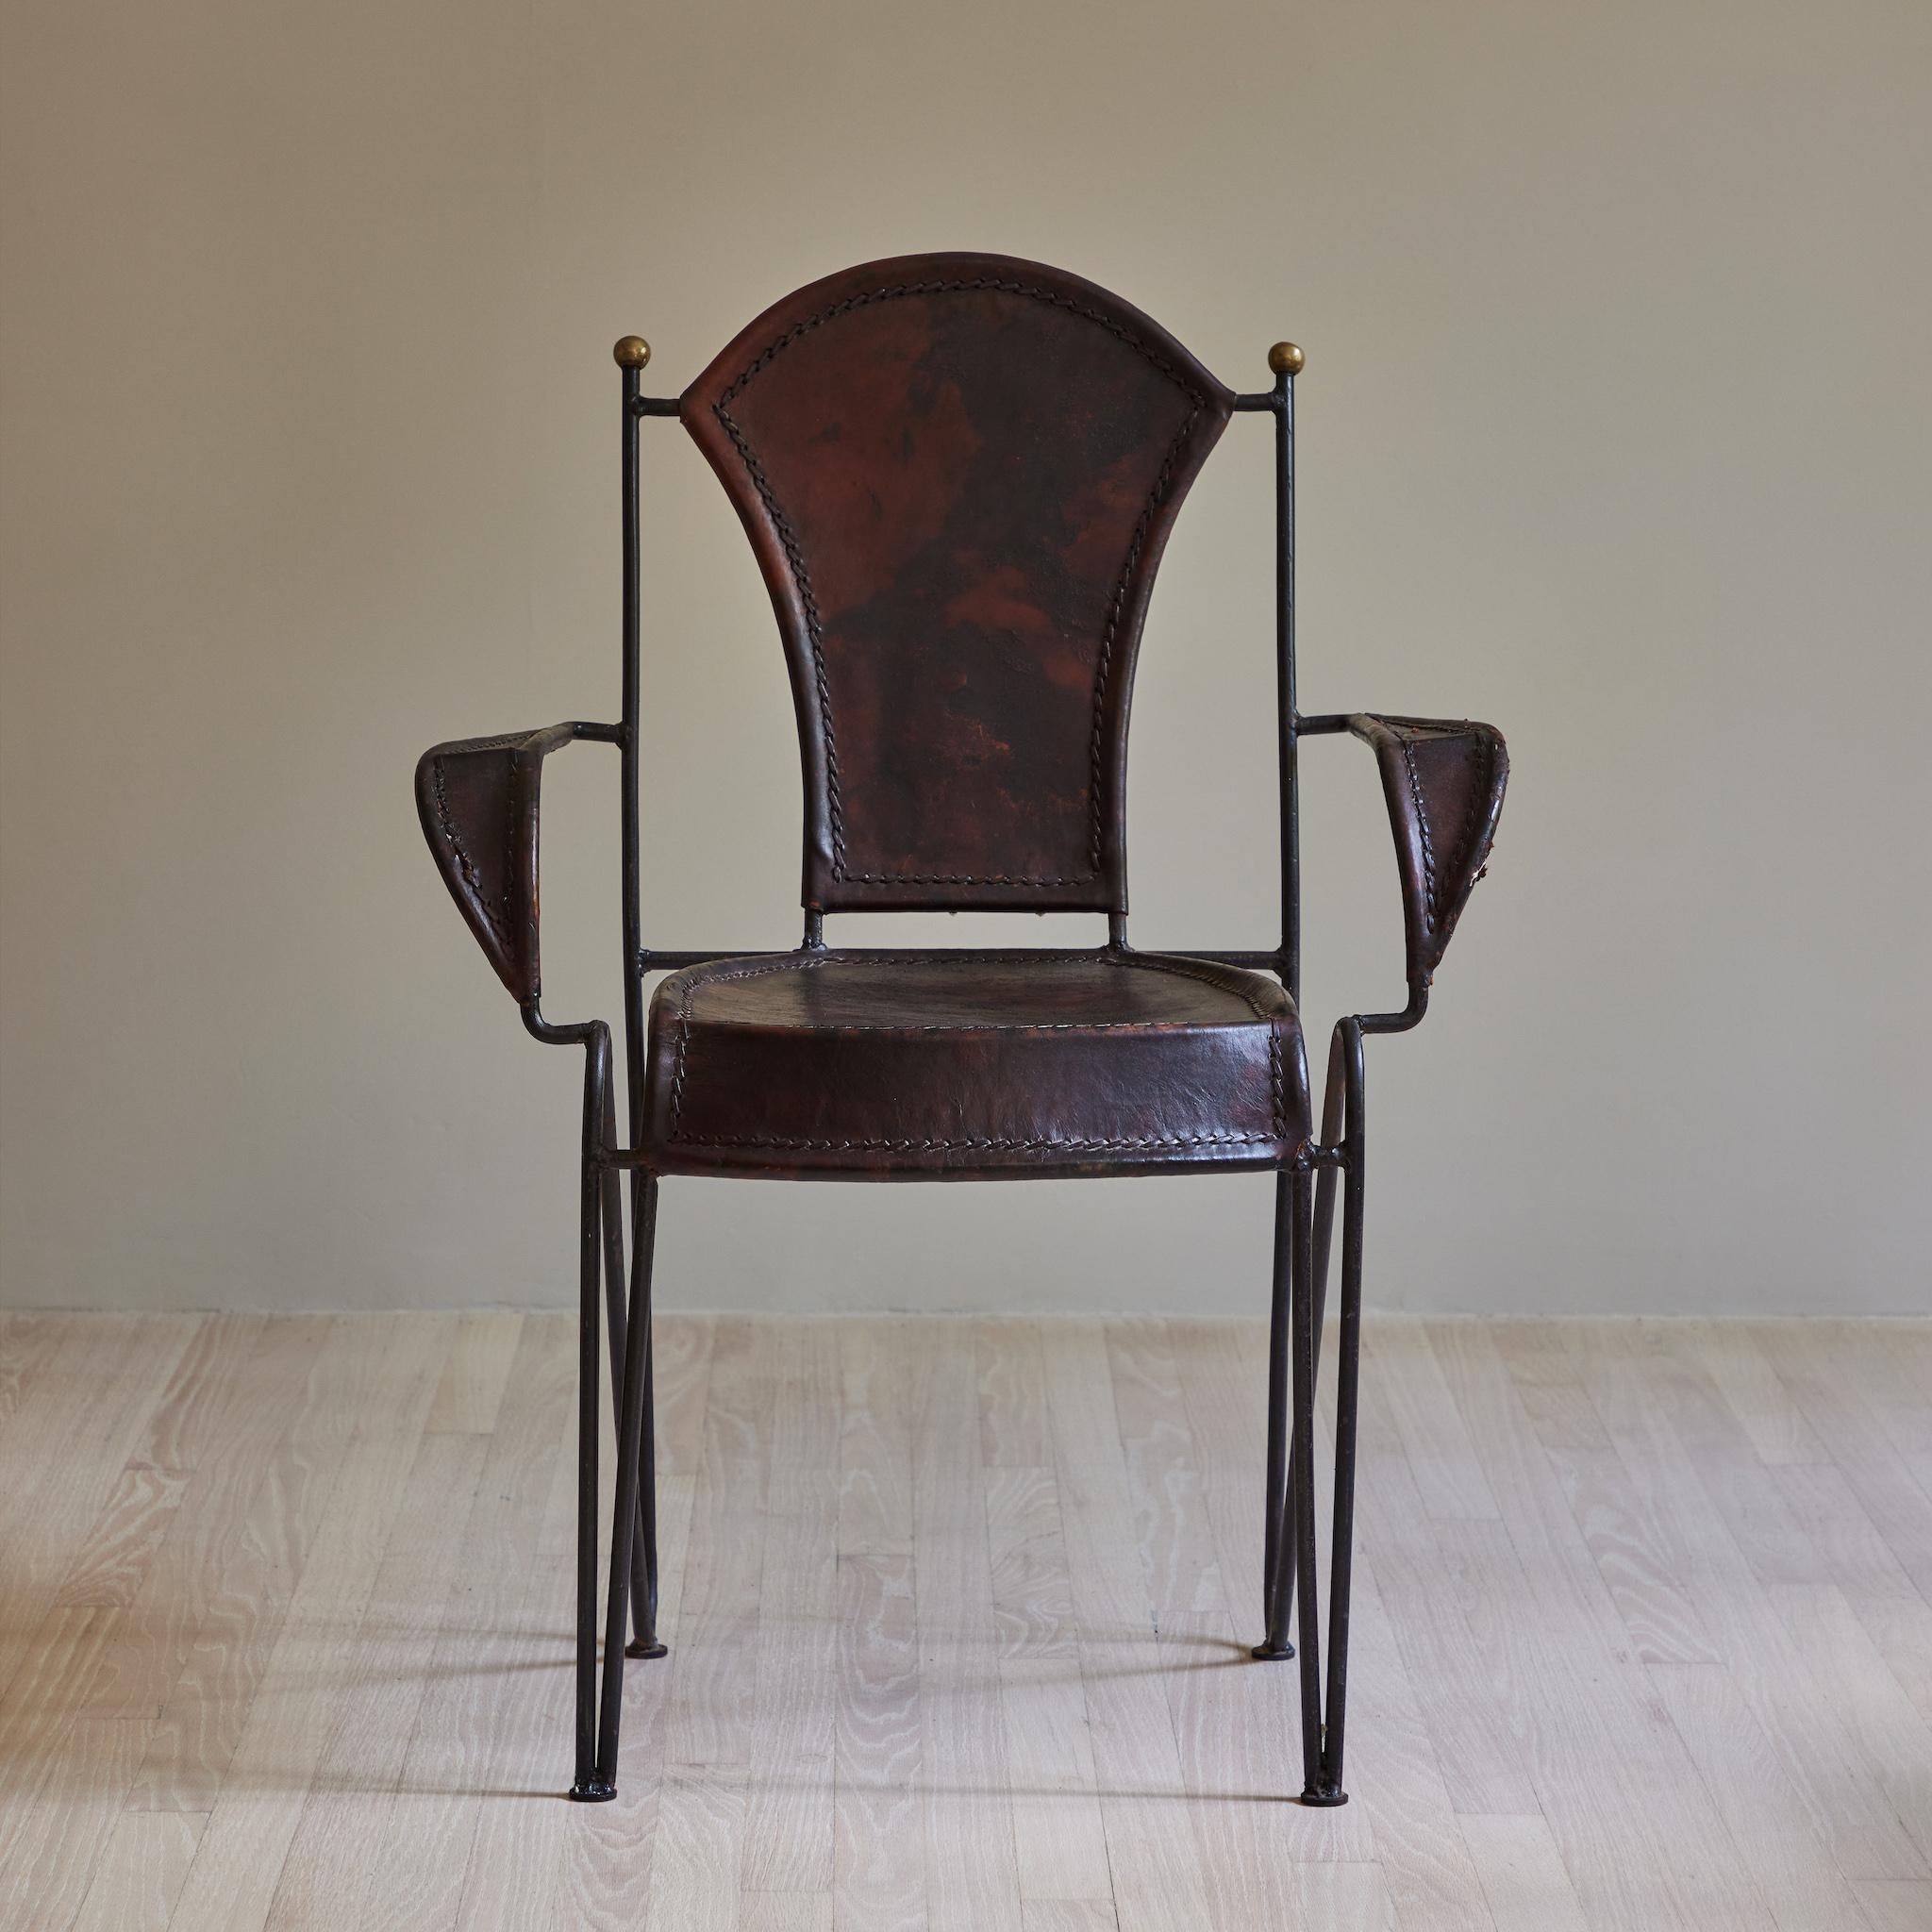 Iron armchair with leather seat and back.